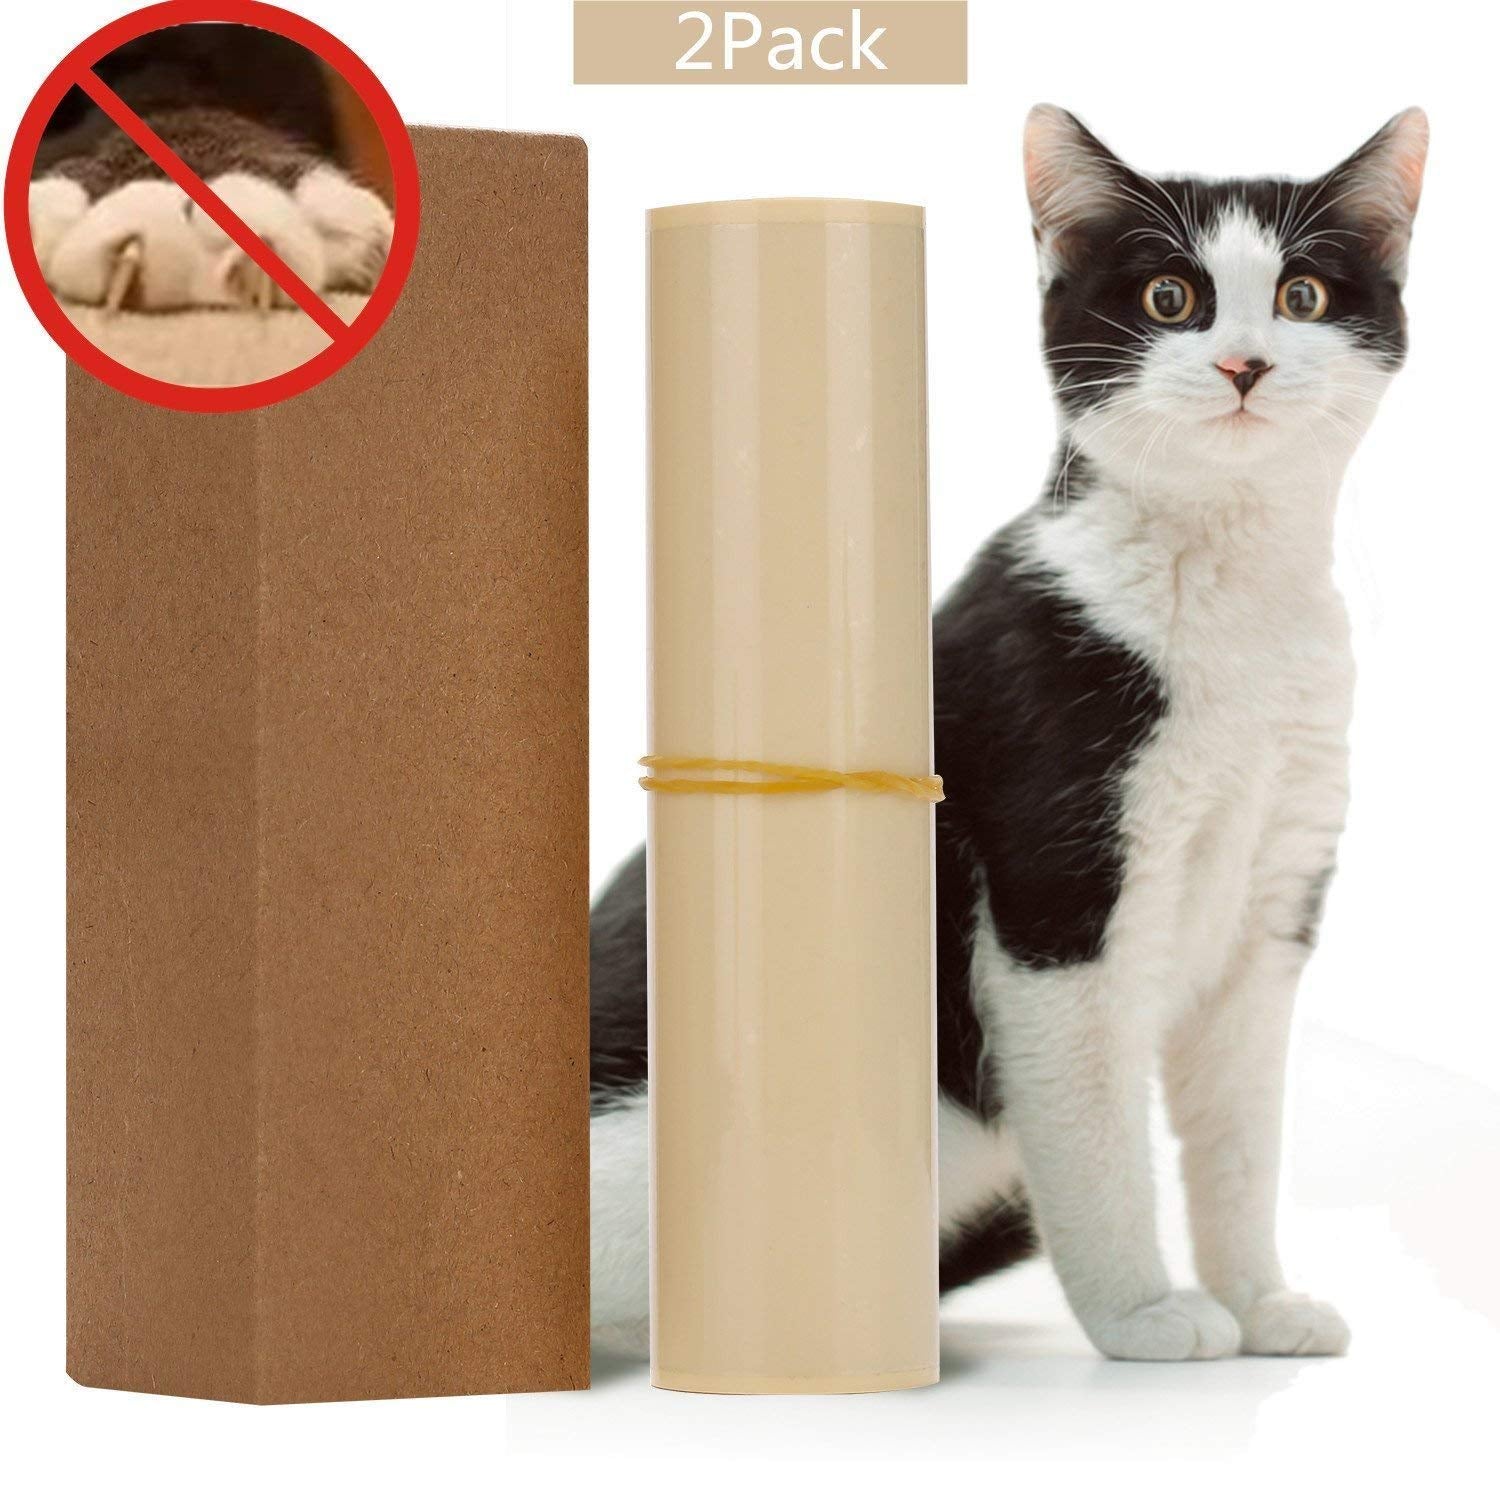 New Upgrade - Large (18.5 X9.05Inch) Furniture Defender Cat Scratching Guard, Furniture Protectors from Pets, anti Cat Scratch Deterrent, Claw Proof Pads for Door(2Pcs/Set)